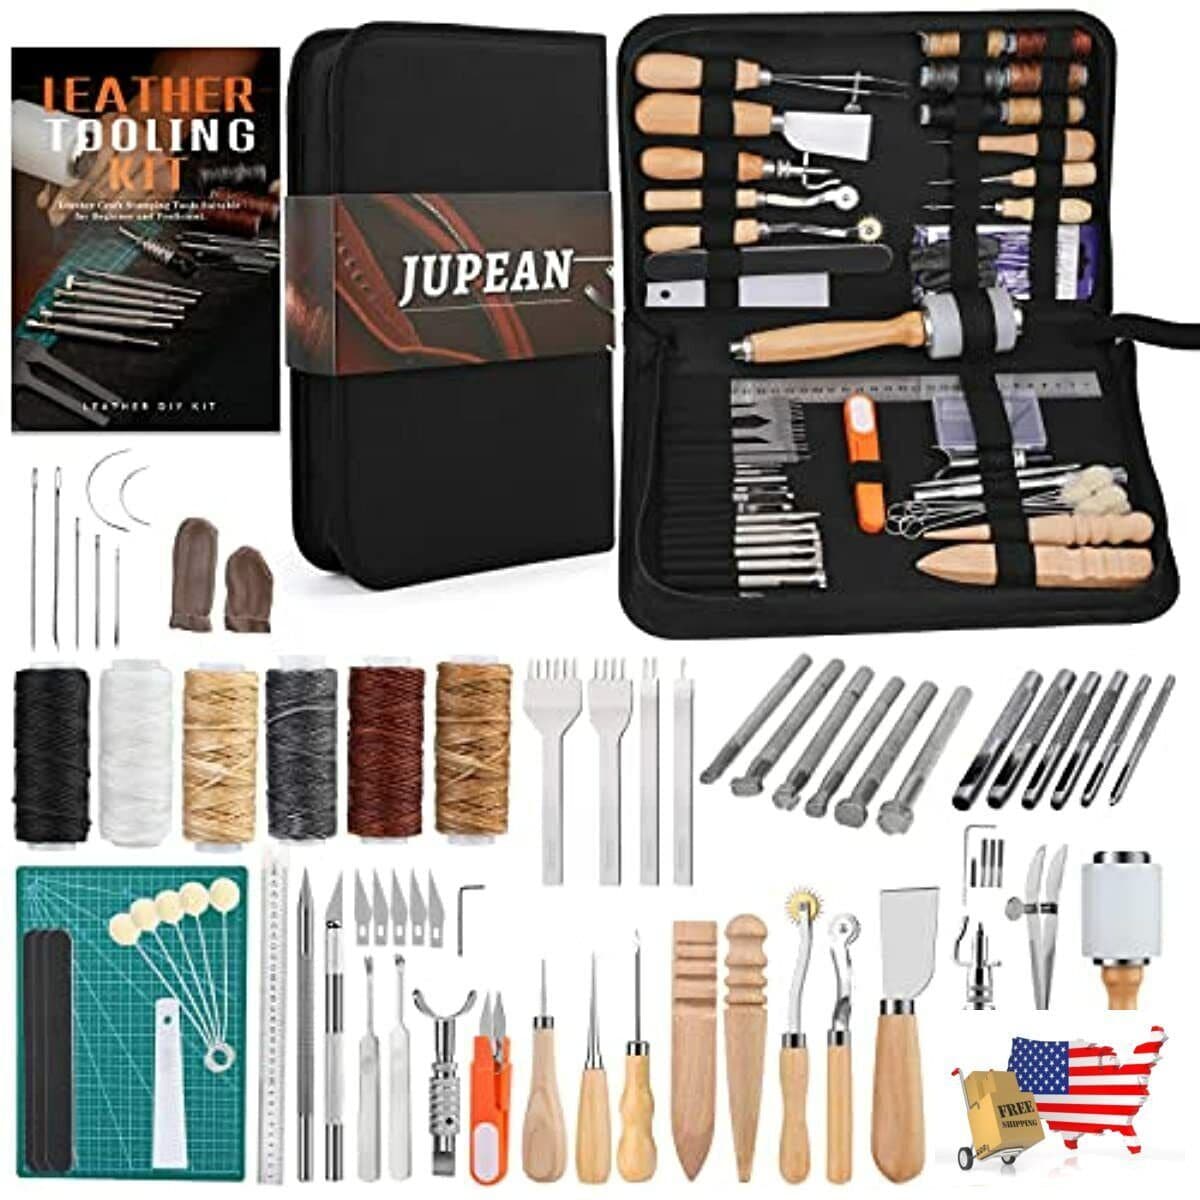 Jupean Leather Sewing Kits, for Beginners and Professionals,32 Pcs